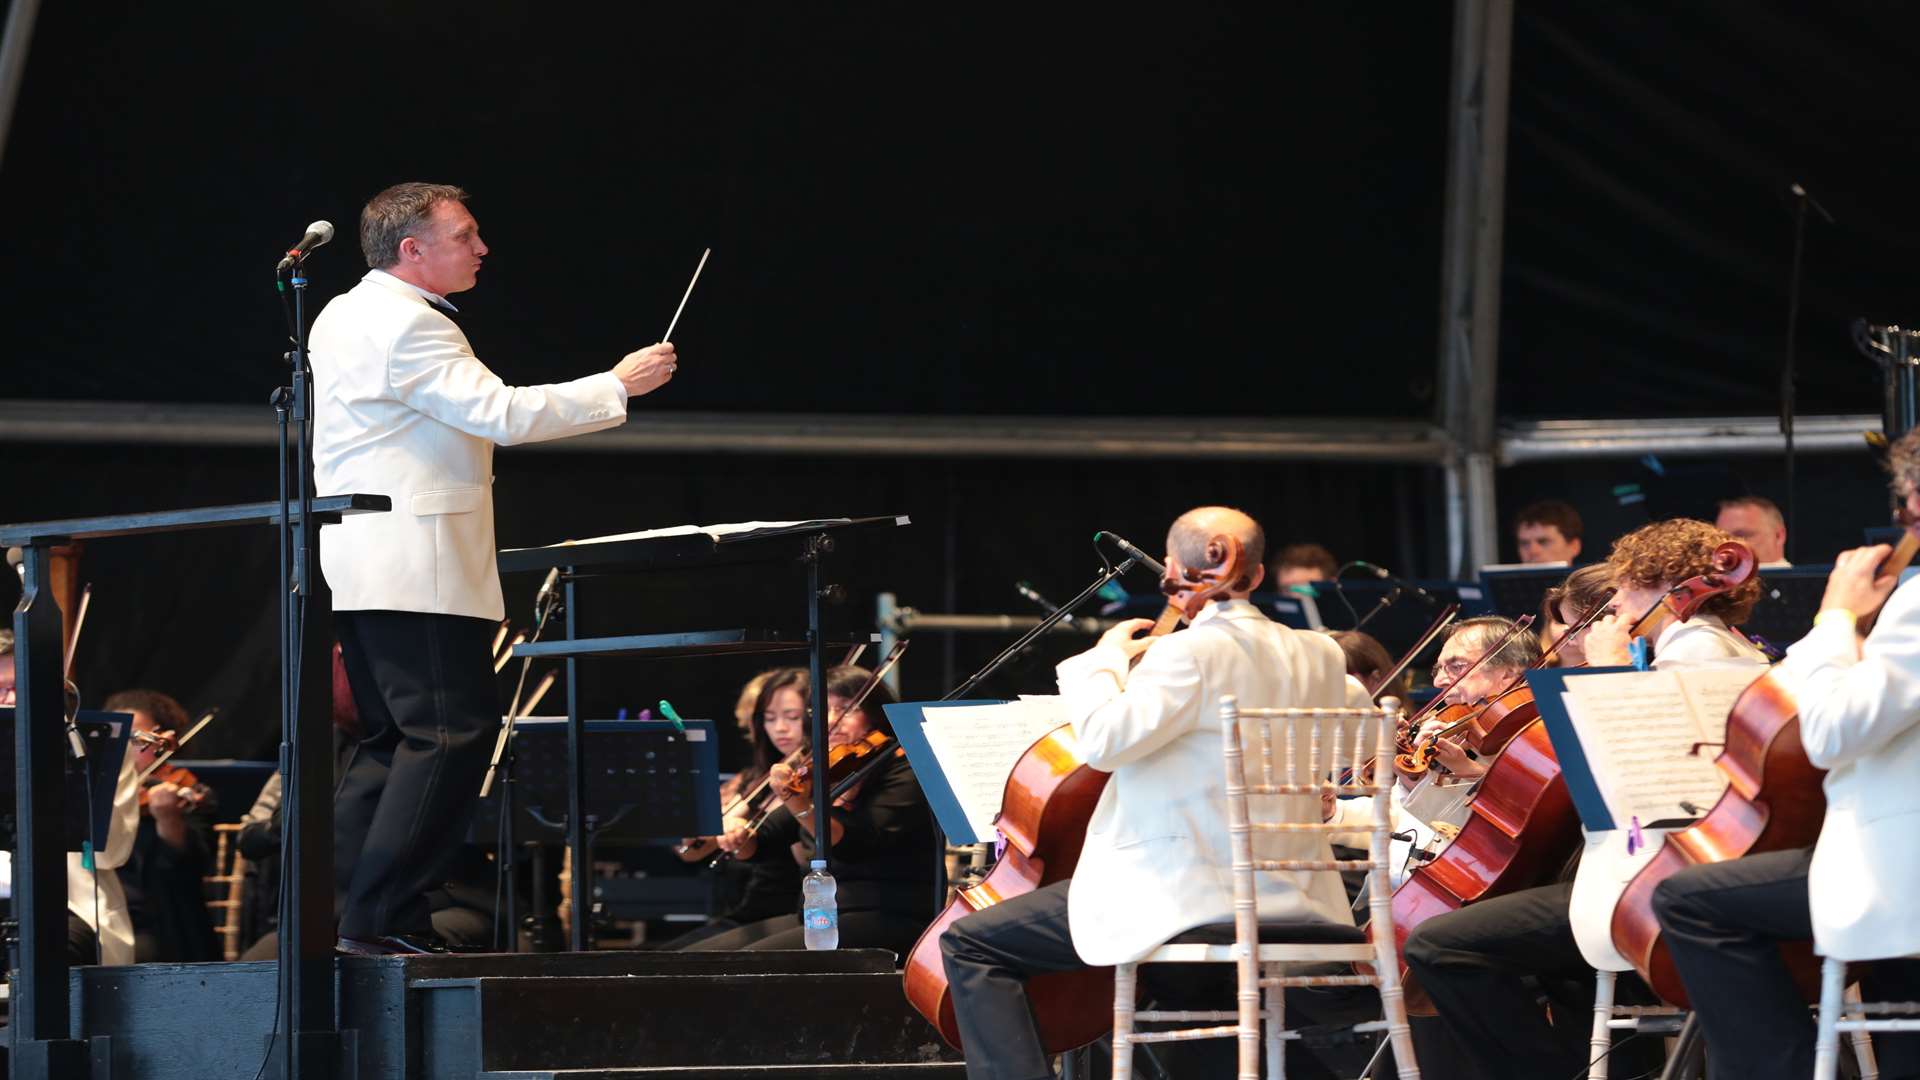 John RIgby conducts the Royal Philharmonic Orchestra